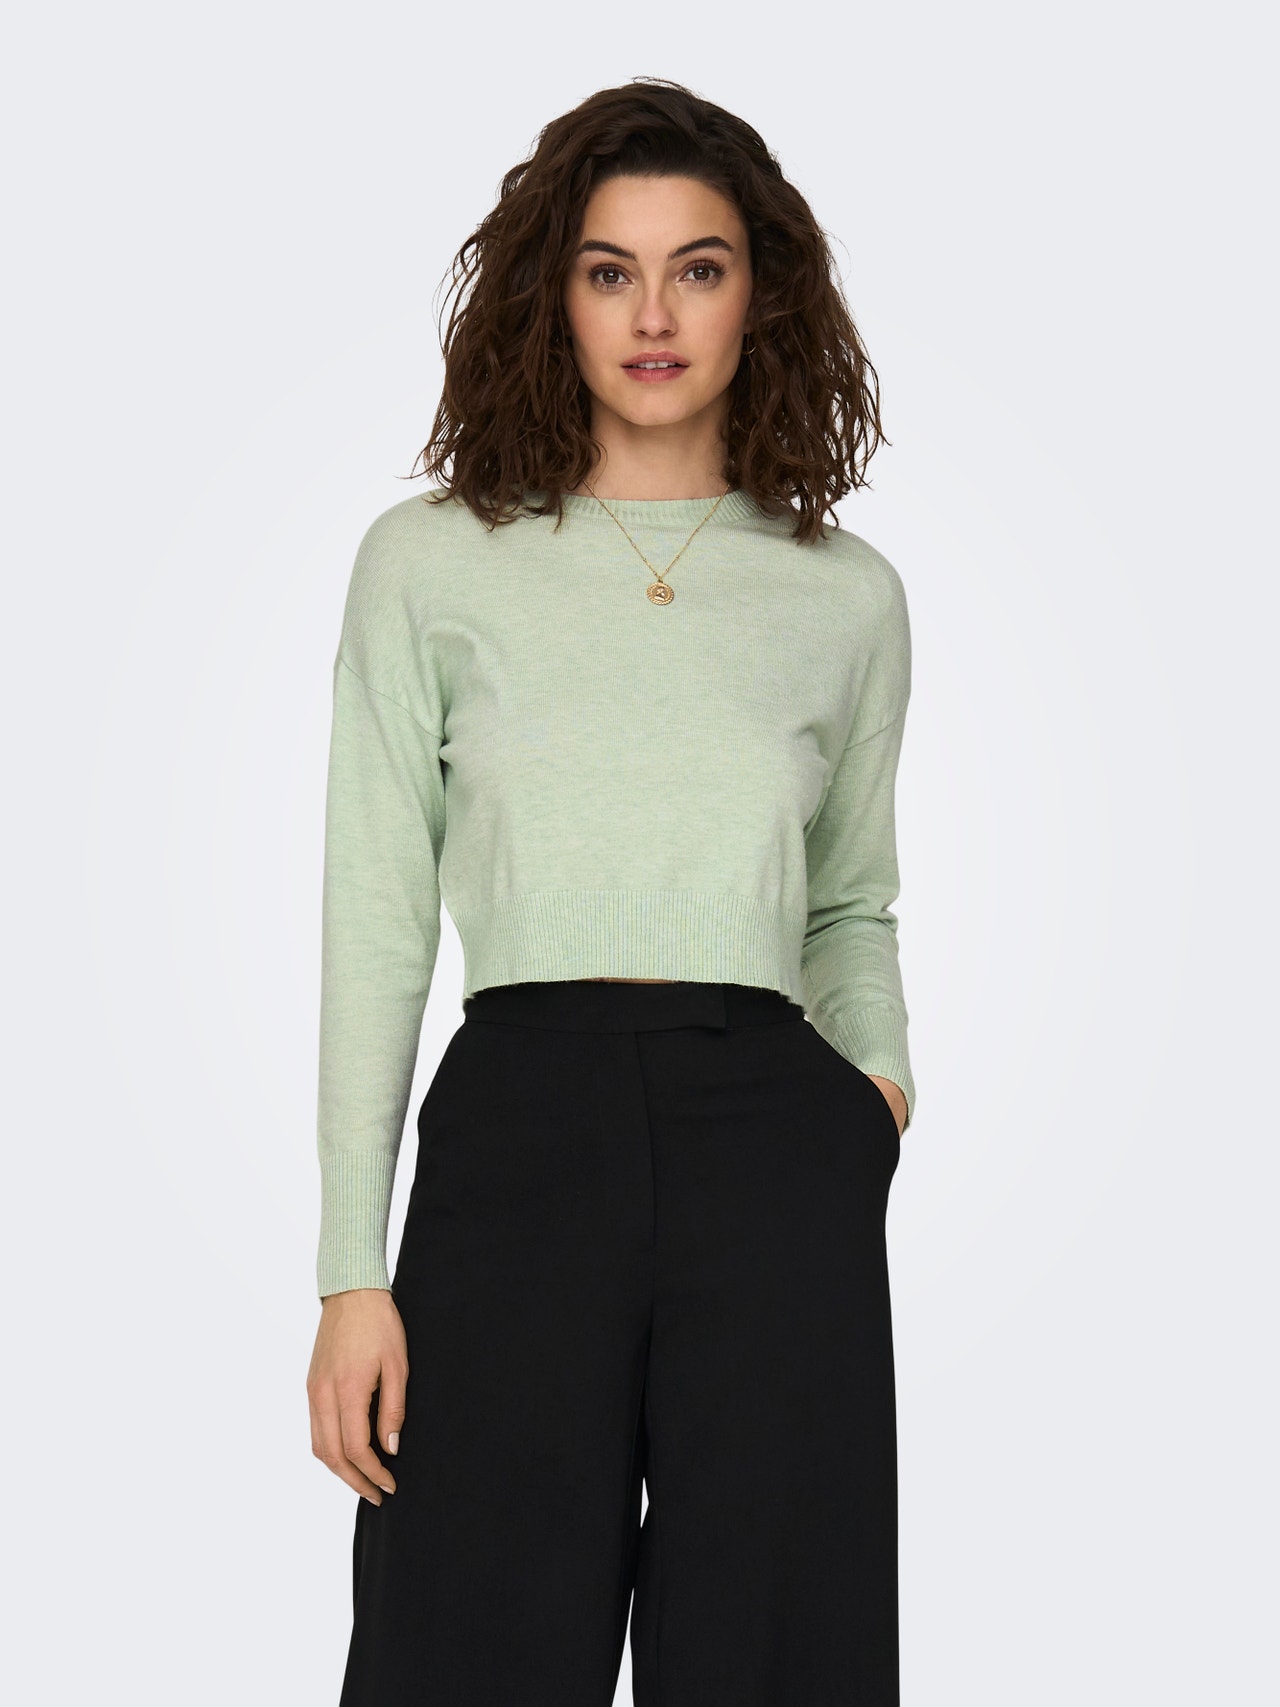 ONLY O-Neck Dropped shoulders Pullover -Mist Green - 15279934